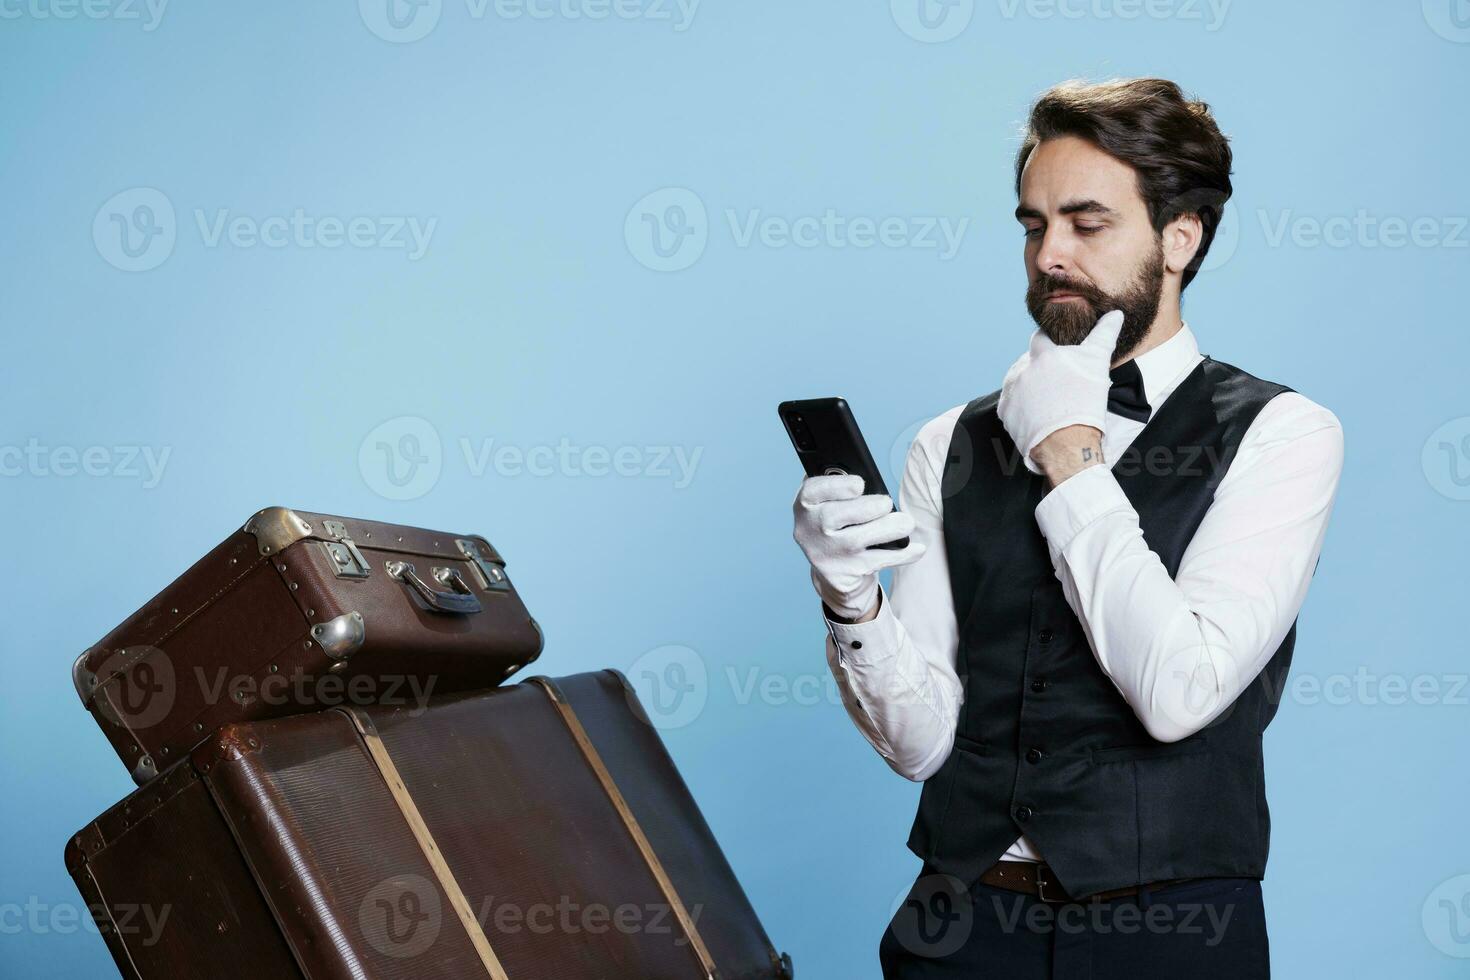 While behaving as skilled member of elegant hotel staff on camera, bellboy uses smartphone to access website. Reservation inquiries get approved electronically by the receptionist. photo